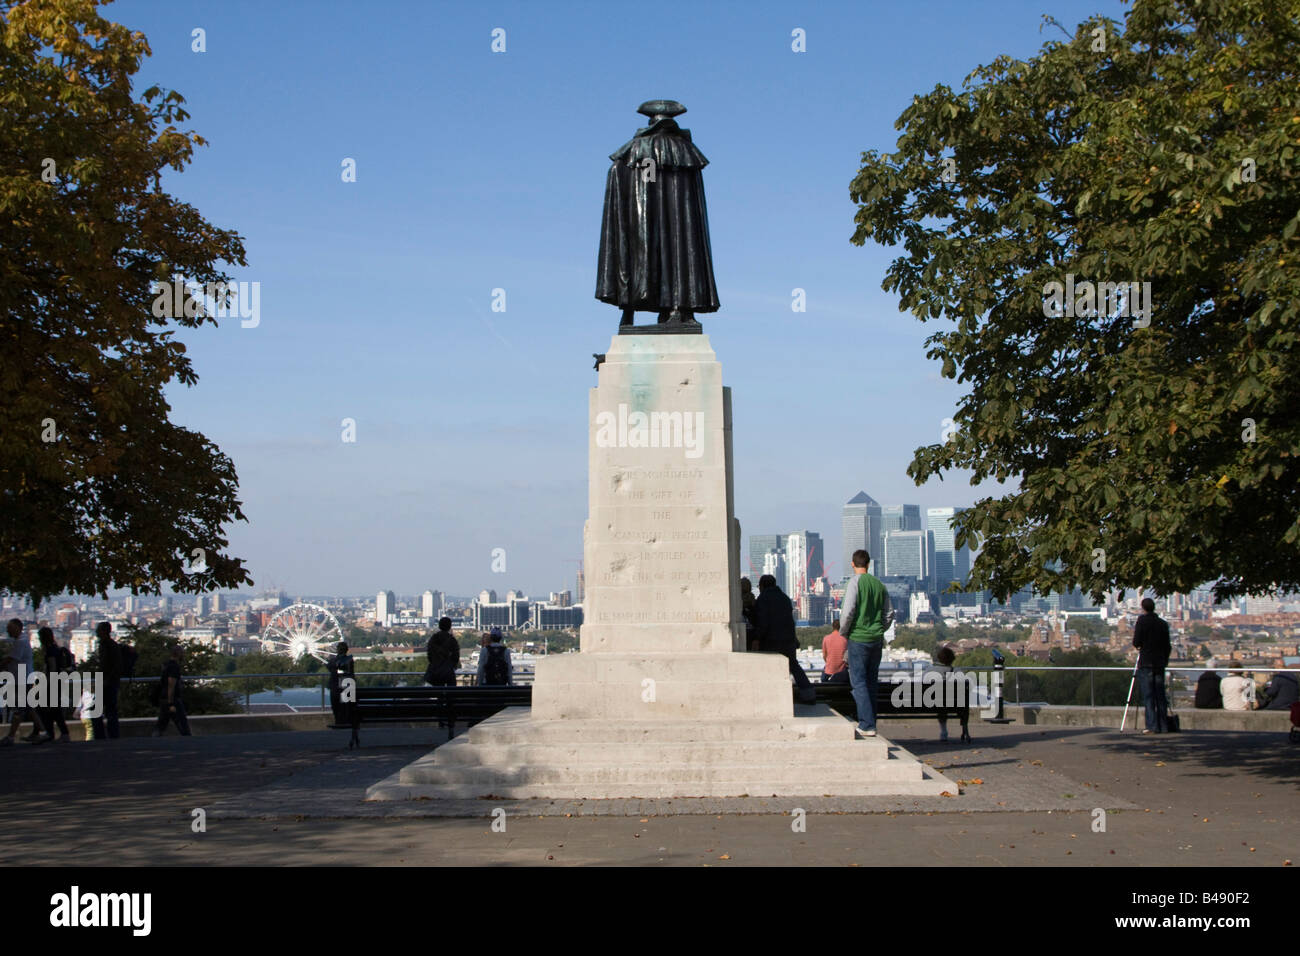 The General Wolfe statue, Greenwich Park, London, England uk gb Stock Photo